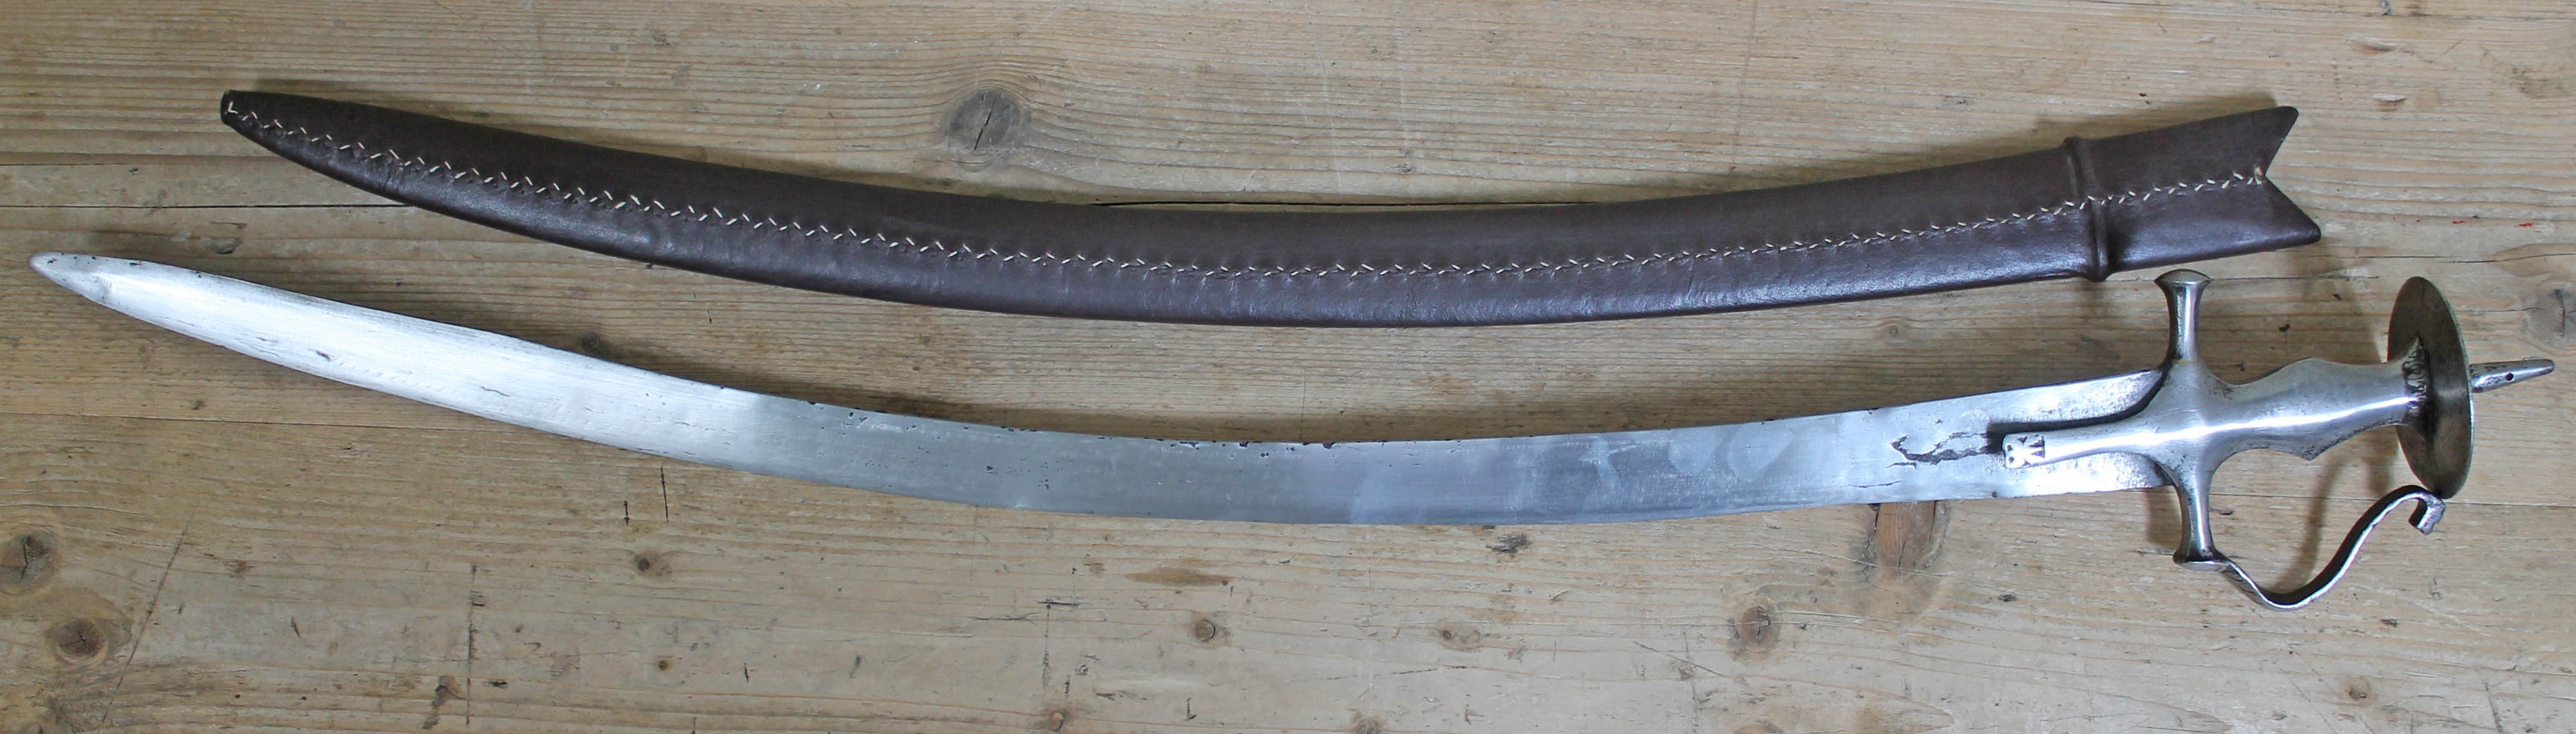 An 18th/19th century Indian cavalry sabre, later scabbard, blade length 78cm.